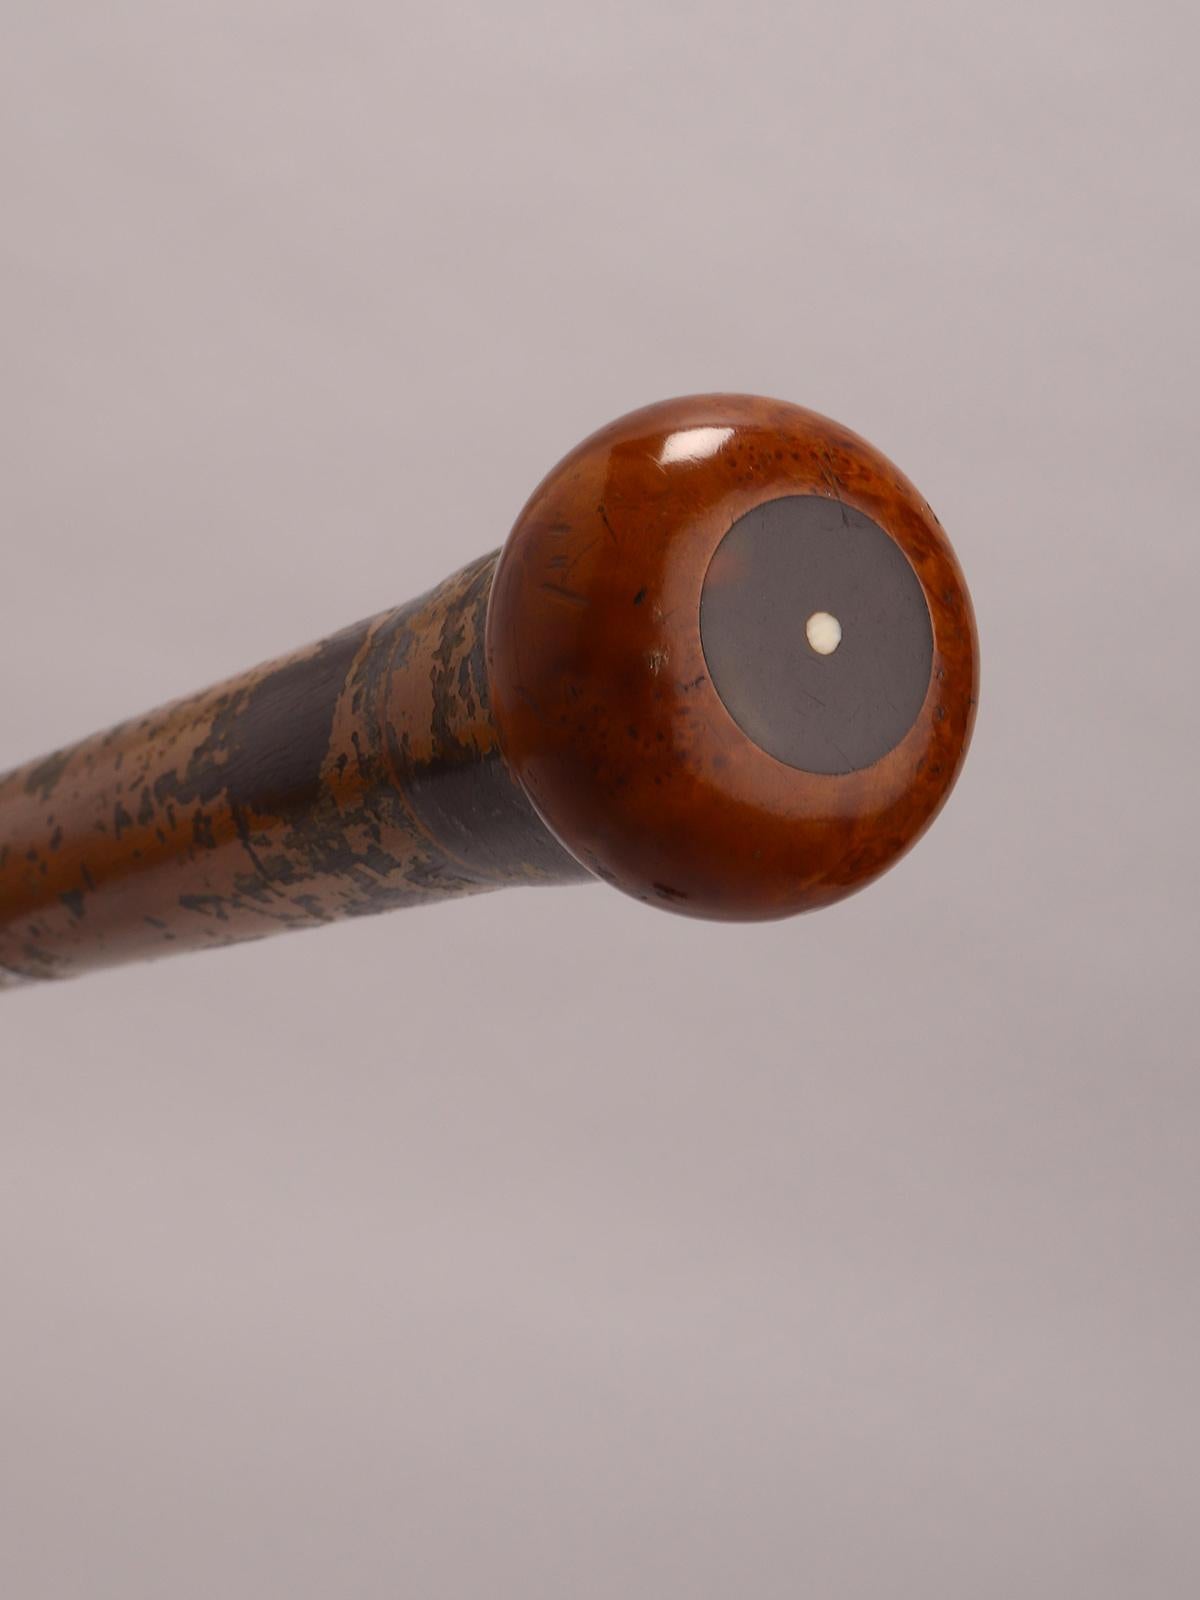 19th Century System walking stick, a telescope, England 1880.  For Sale